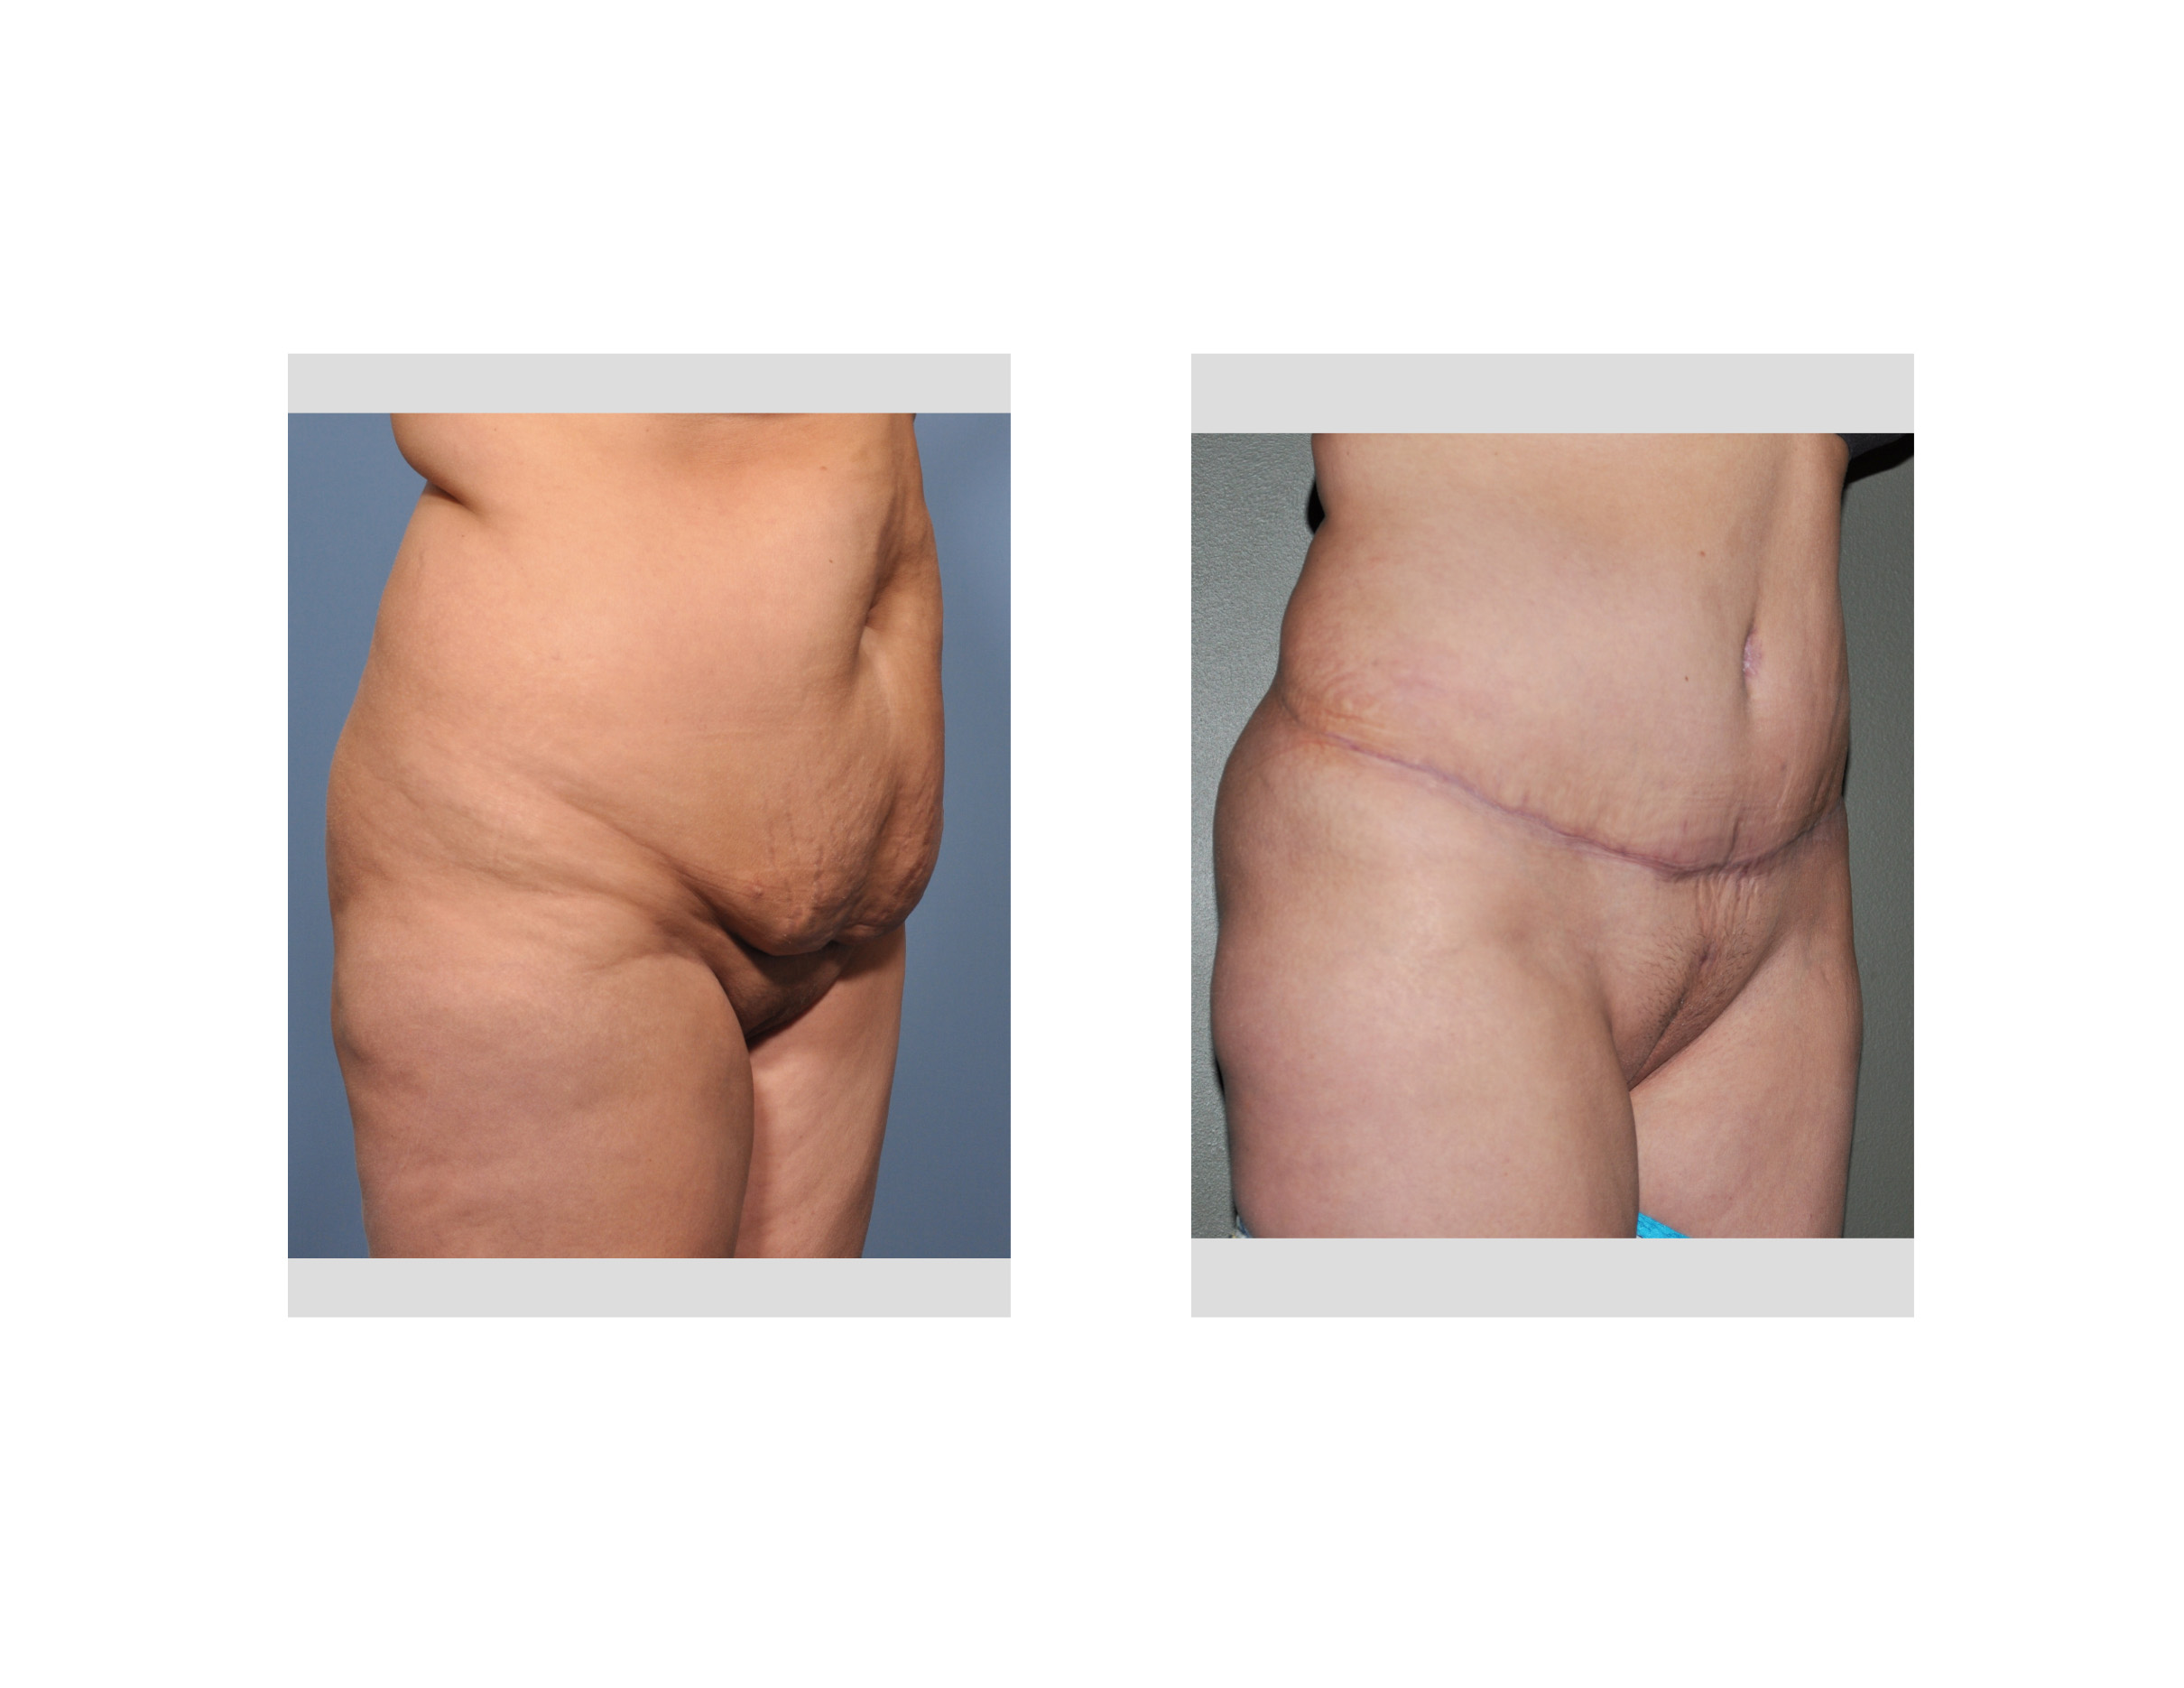 What Is The Cost Of A Tummy Tuck? - Plastic Surgeon